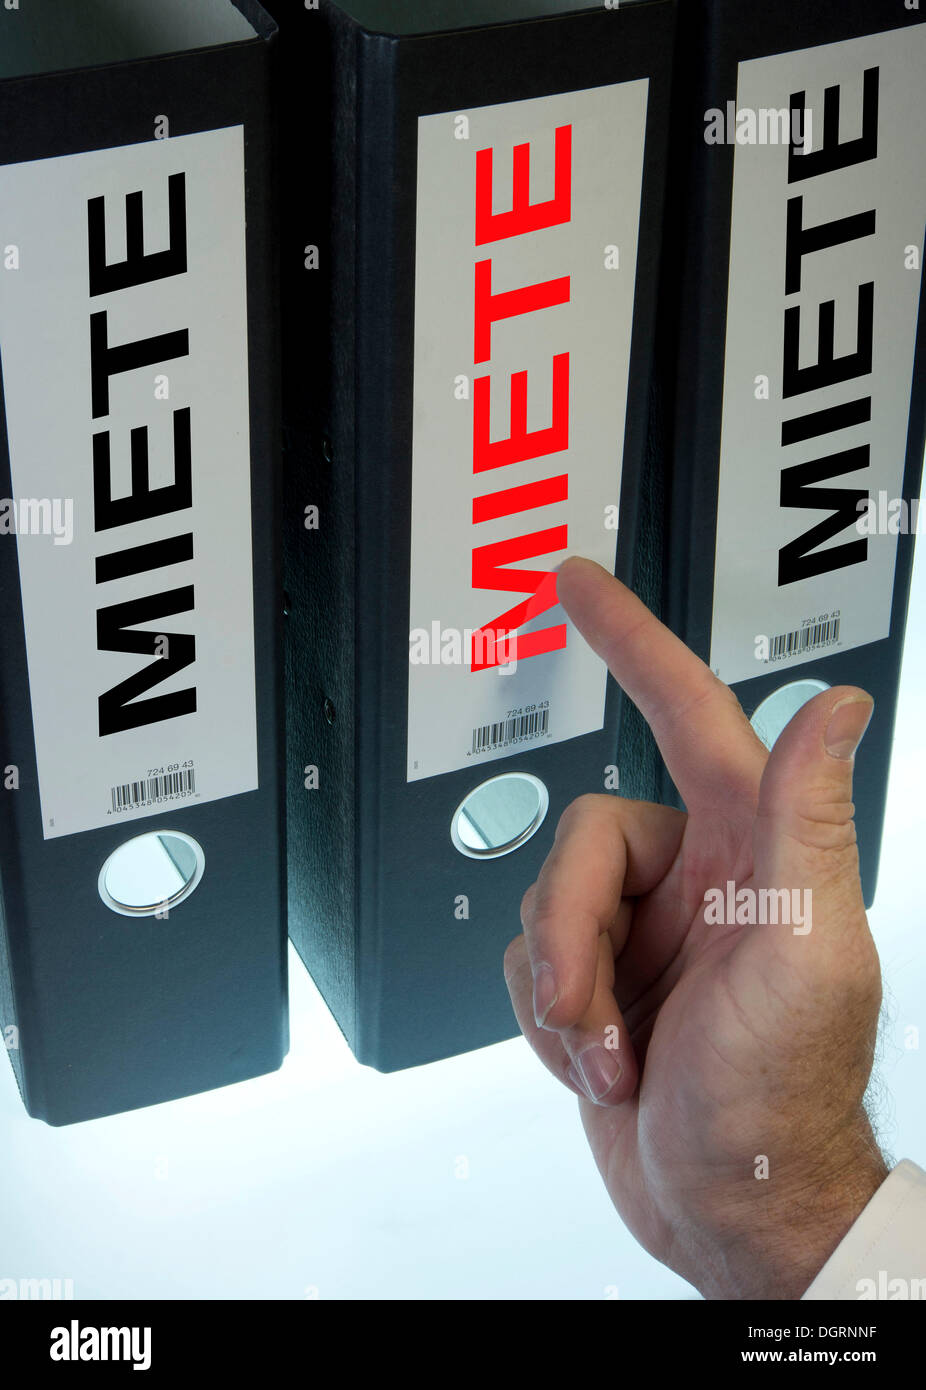 Hand pointing to a file folder labeled 'Miete', German for 'Rent' Stock Photo